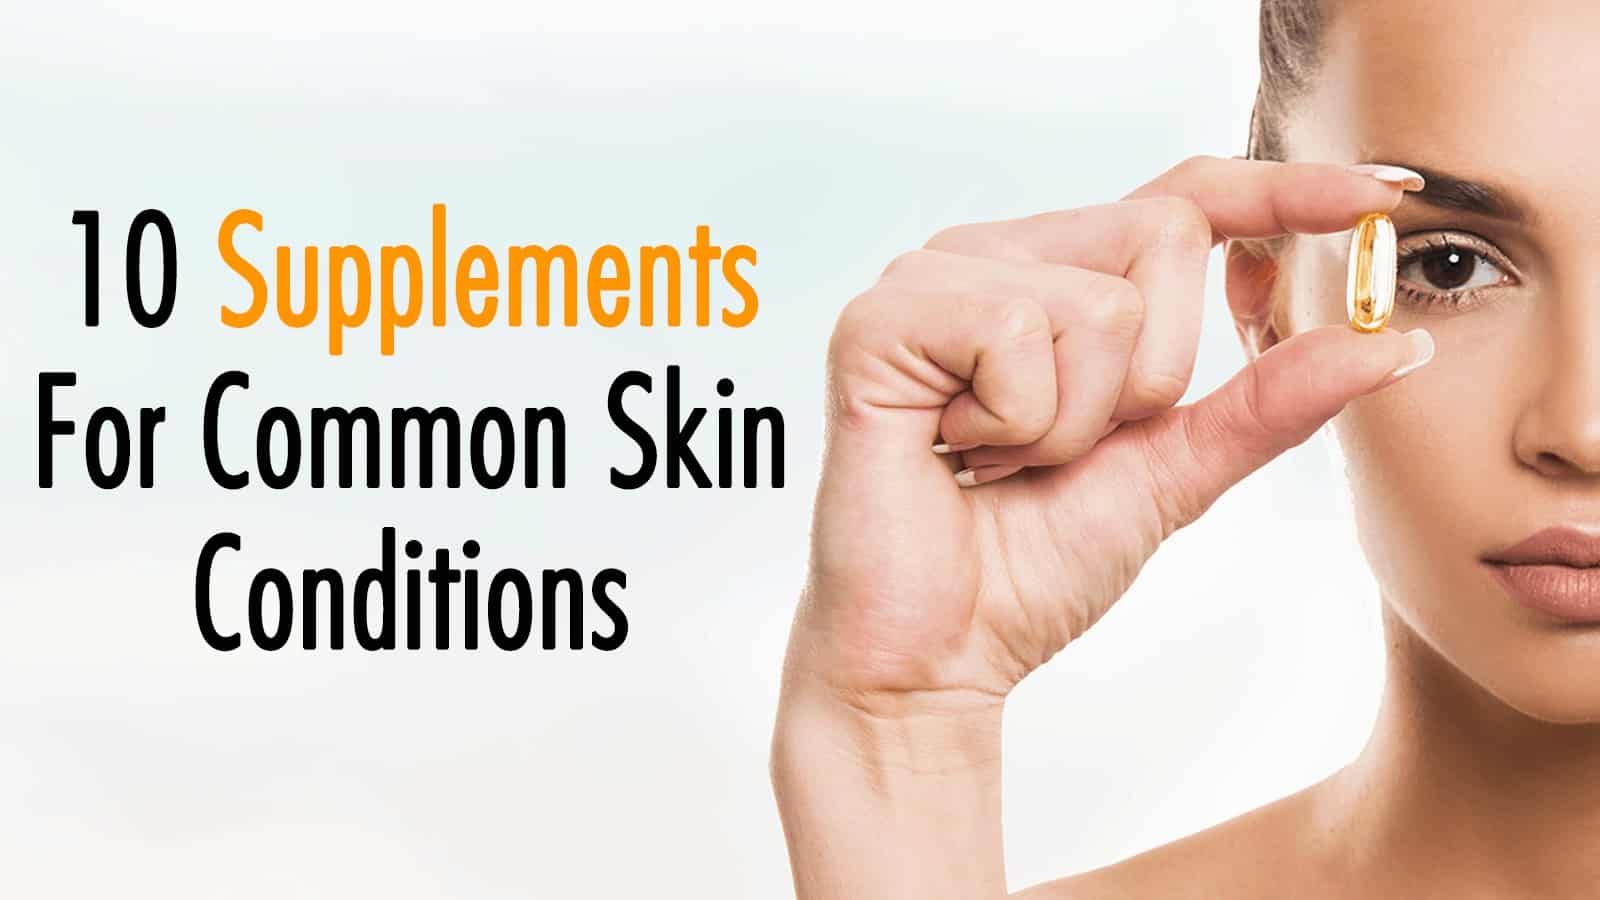 10 Supplements For Common Skin Conditions